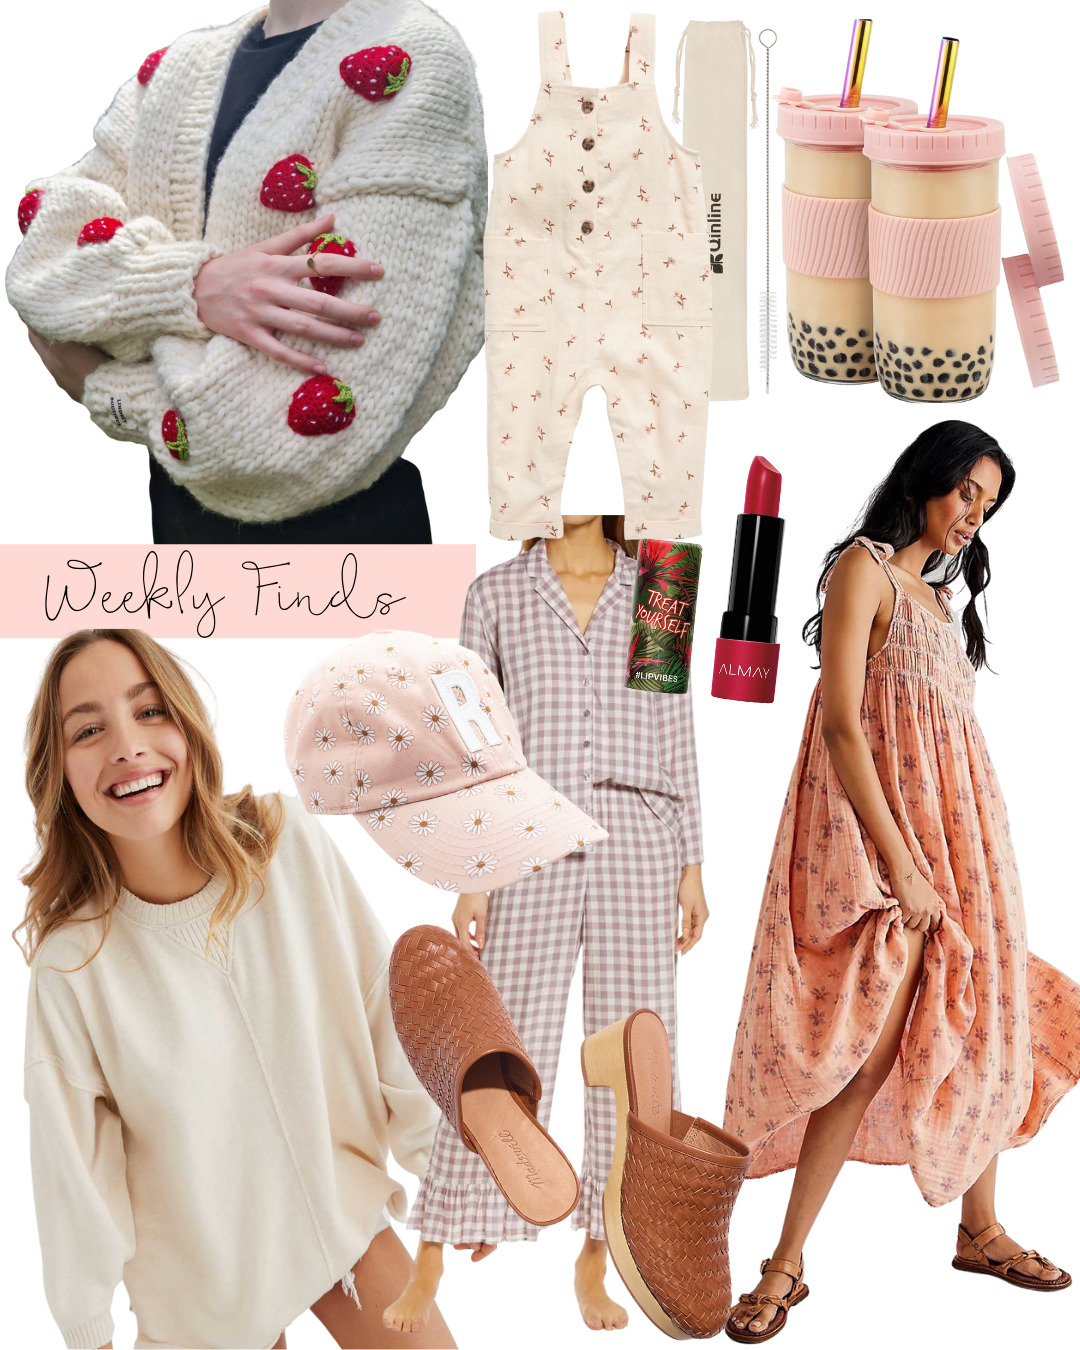 Weekly Finds + Lucy Hale’s Signature Red Lipstick in The Hating Game